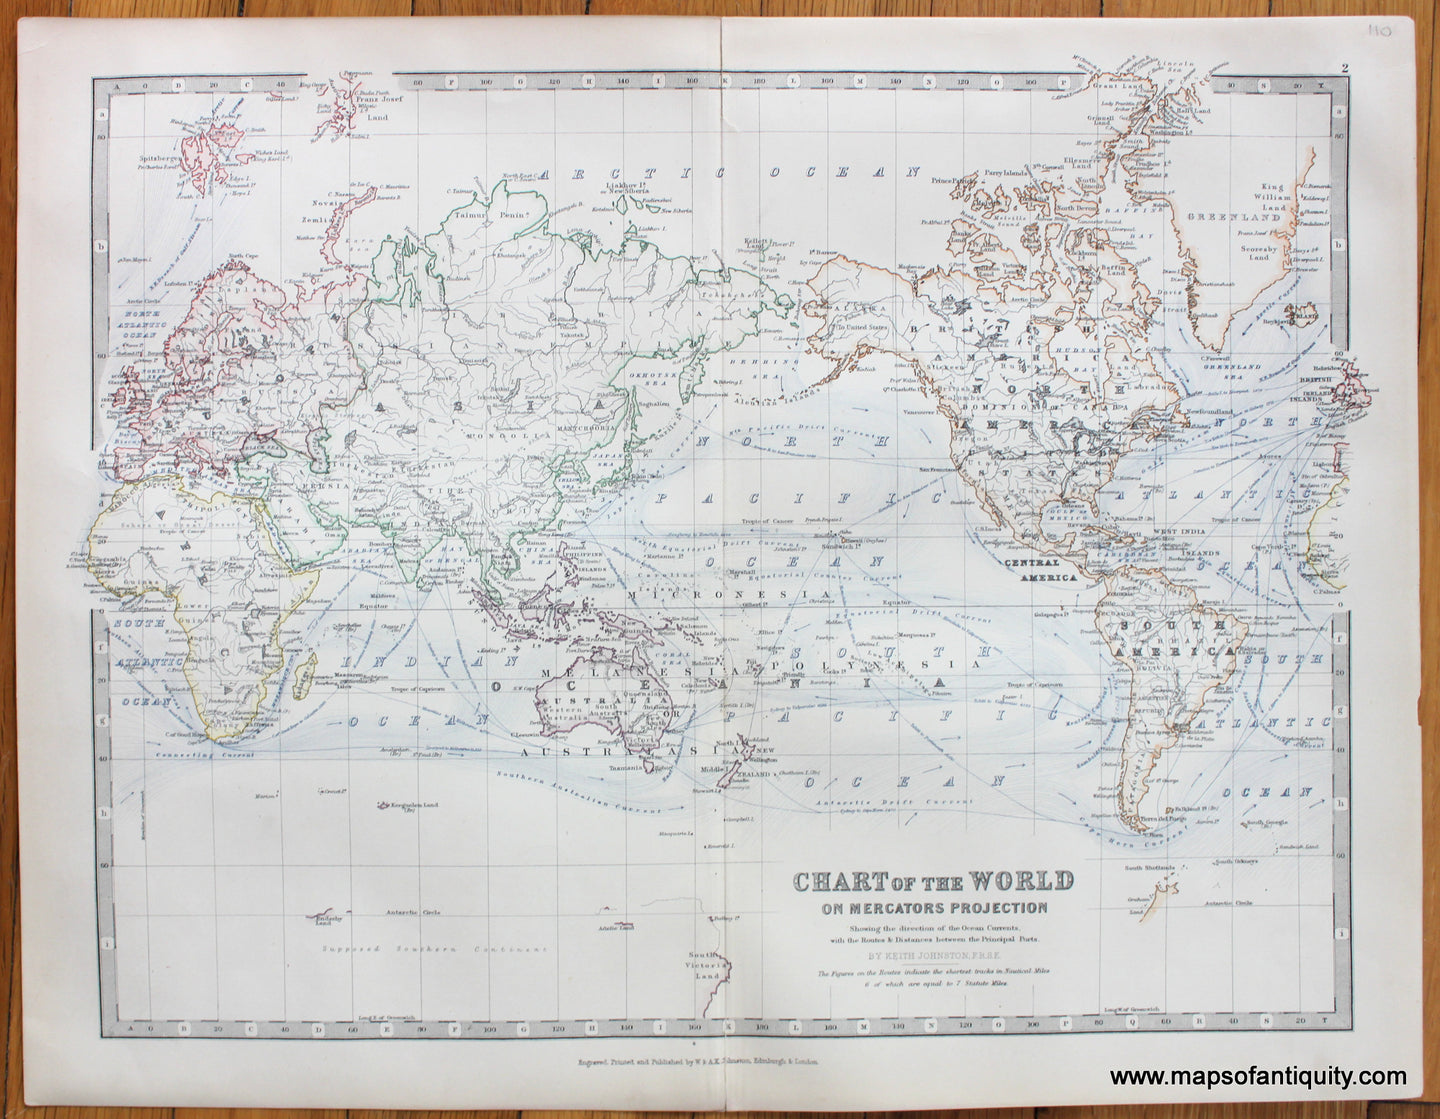 Antique-Printed-Color-Map-Chart-of-the-World-on-Mercators-Projection-Showing-the-direction-of-the-Ocean-Currents-with-the-Routes-and-Distances-between-the-Principal-Ports.-World--1880-Johnston-Maps-Of-Antiquity